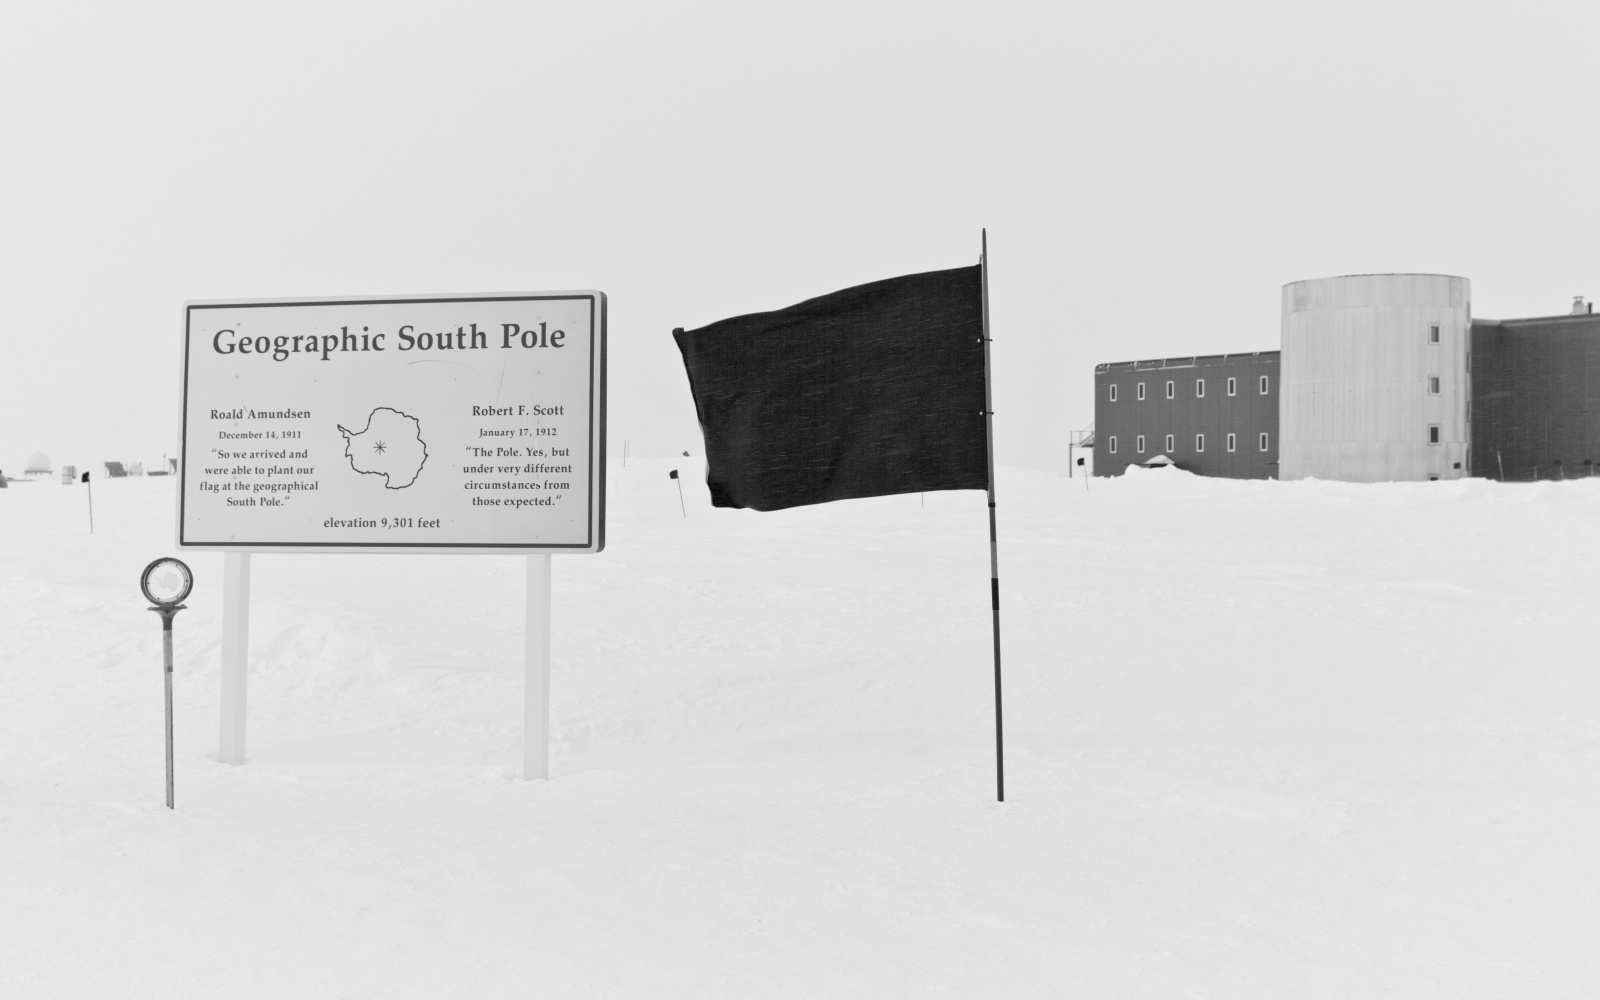 The picture shows a black flag in the snow next to an information board about the South Pole and a house in the background.